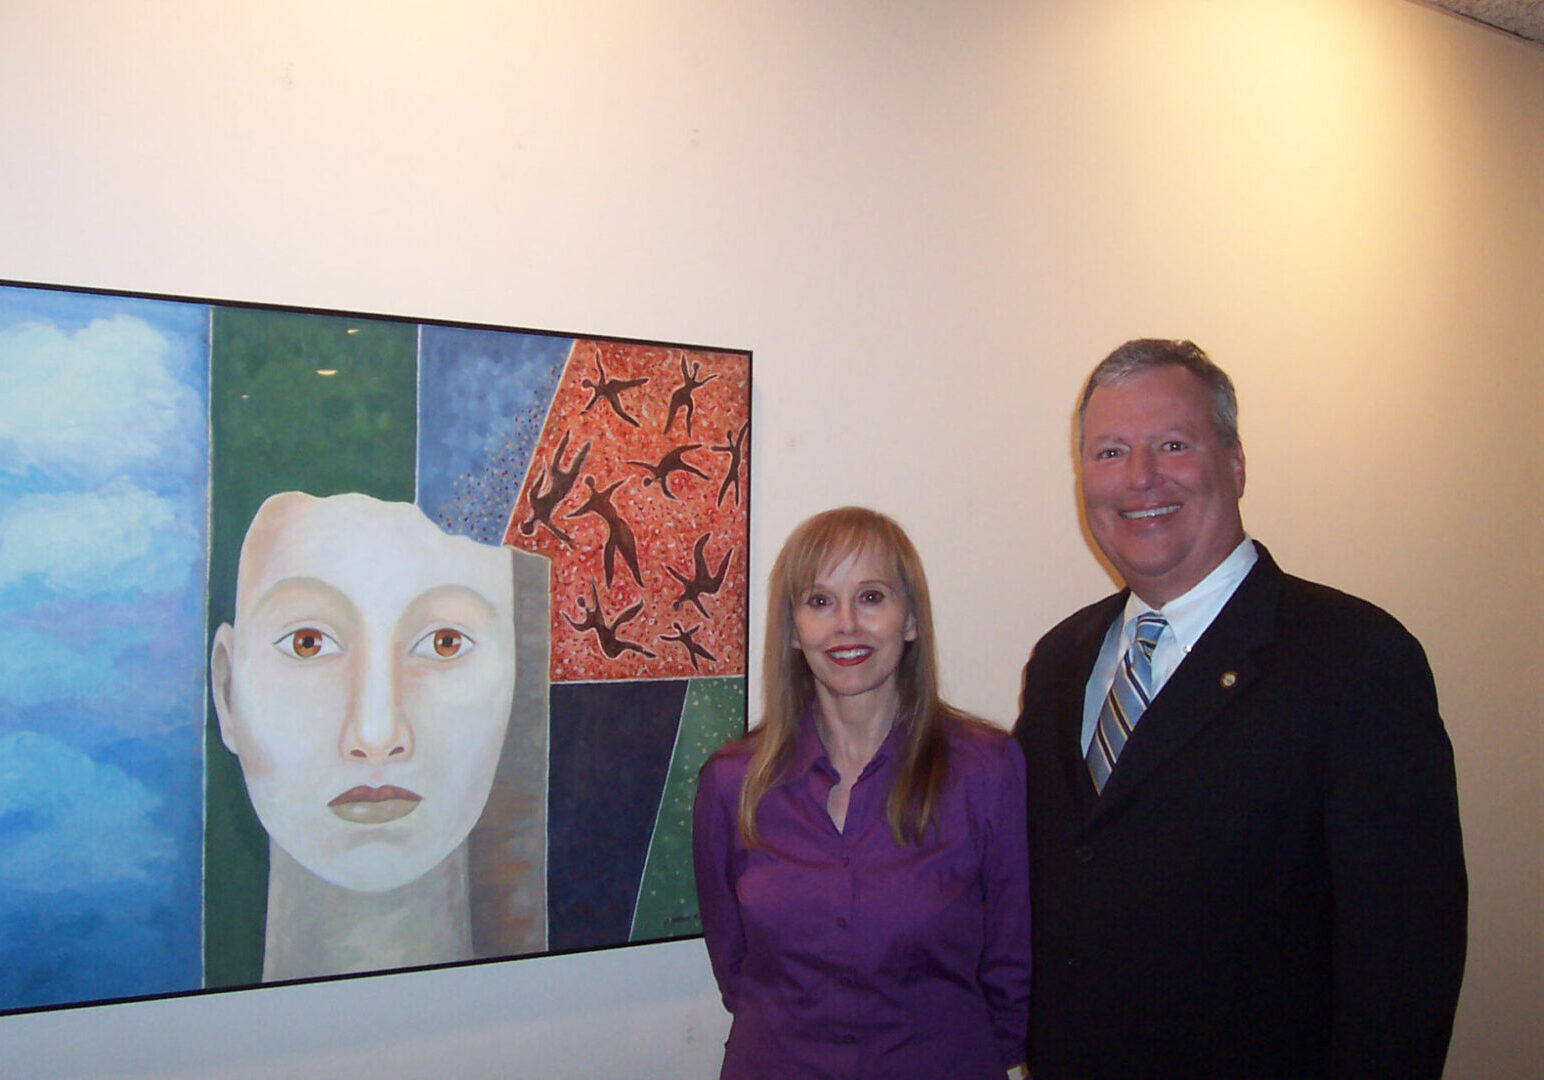 A man and woman standing in front of a painting.